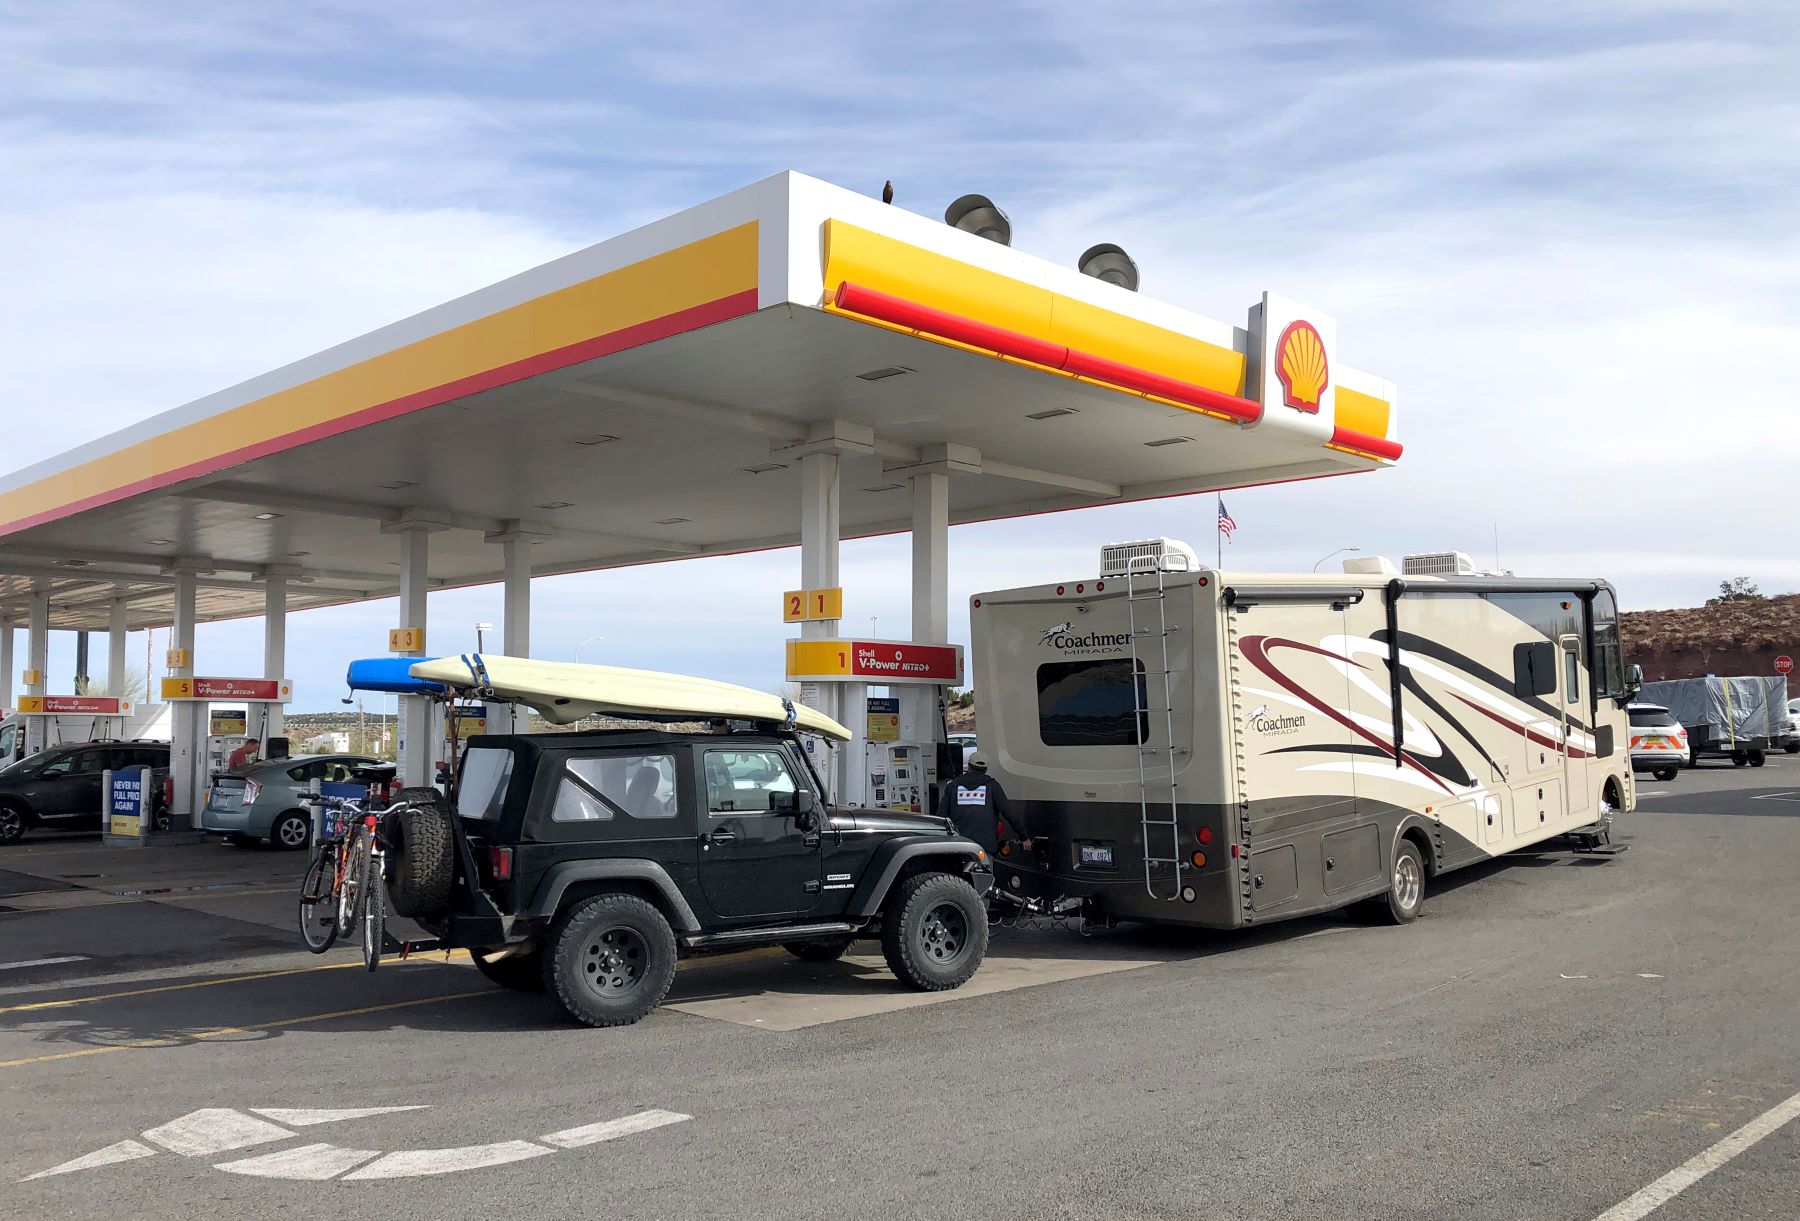 An RV parked at a Shell gas station to refuel in Kingman, Arizona